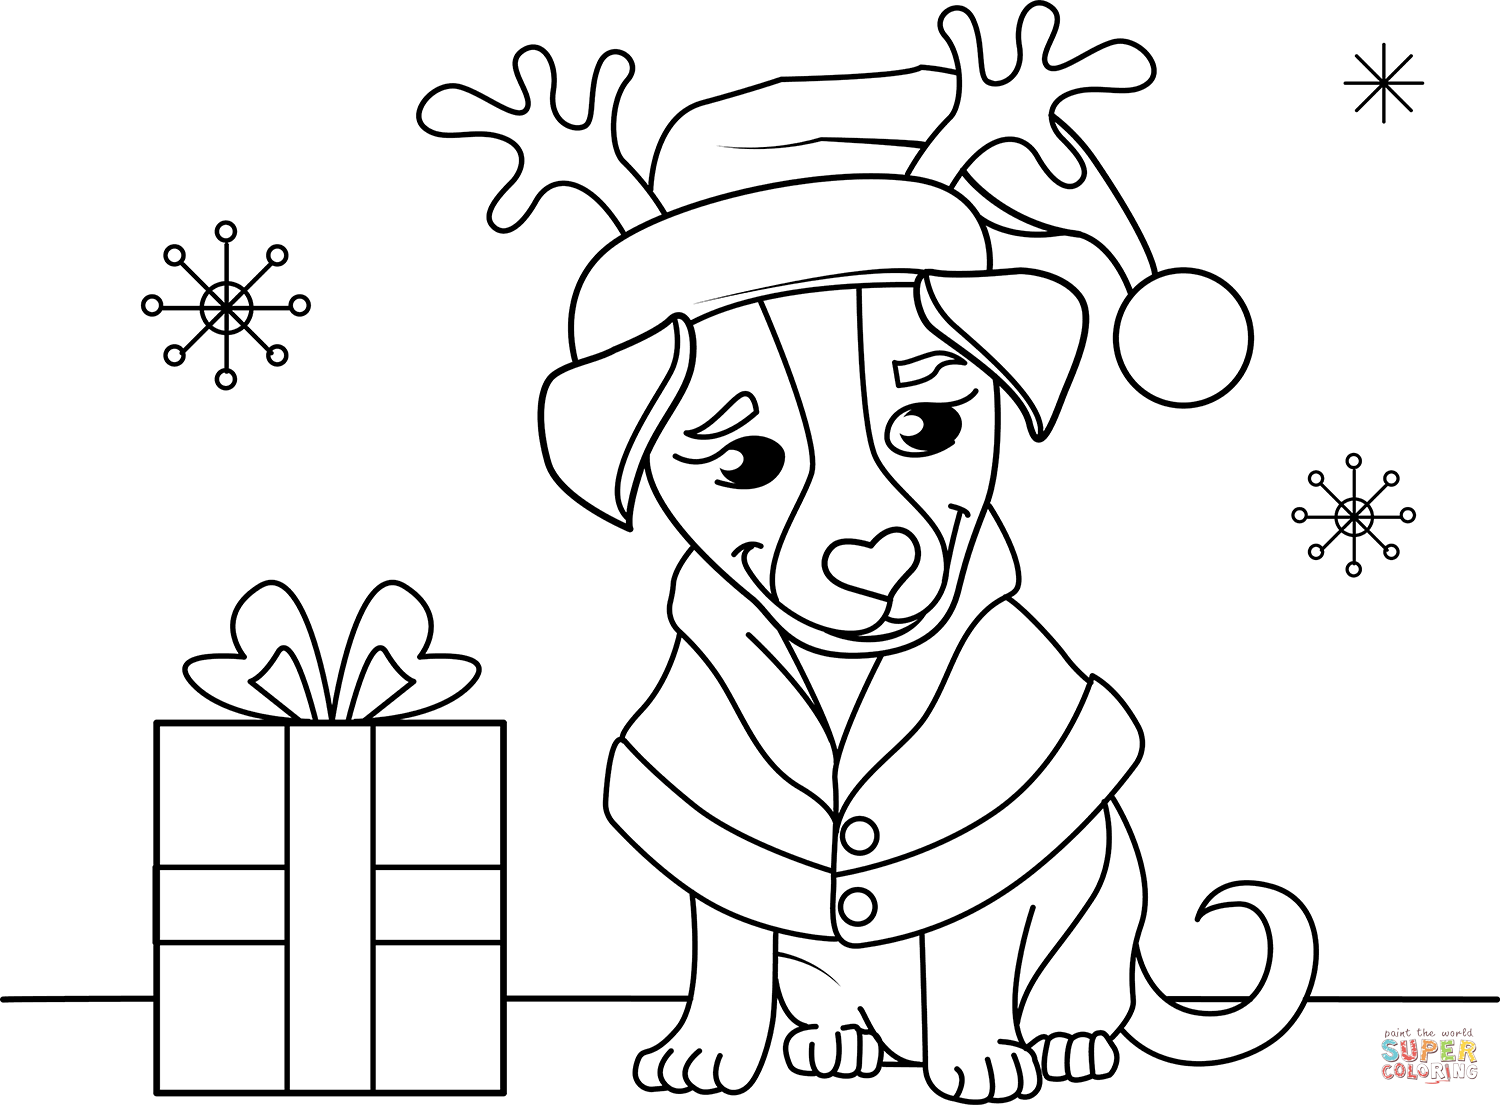 Christmas puppy coloring page free printable coloring pages